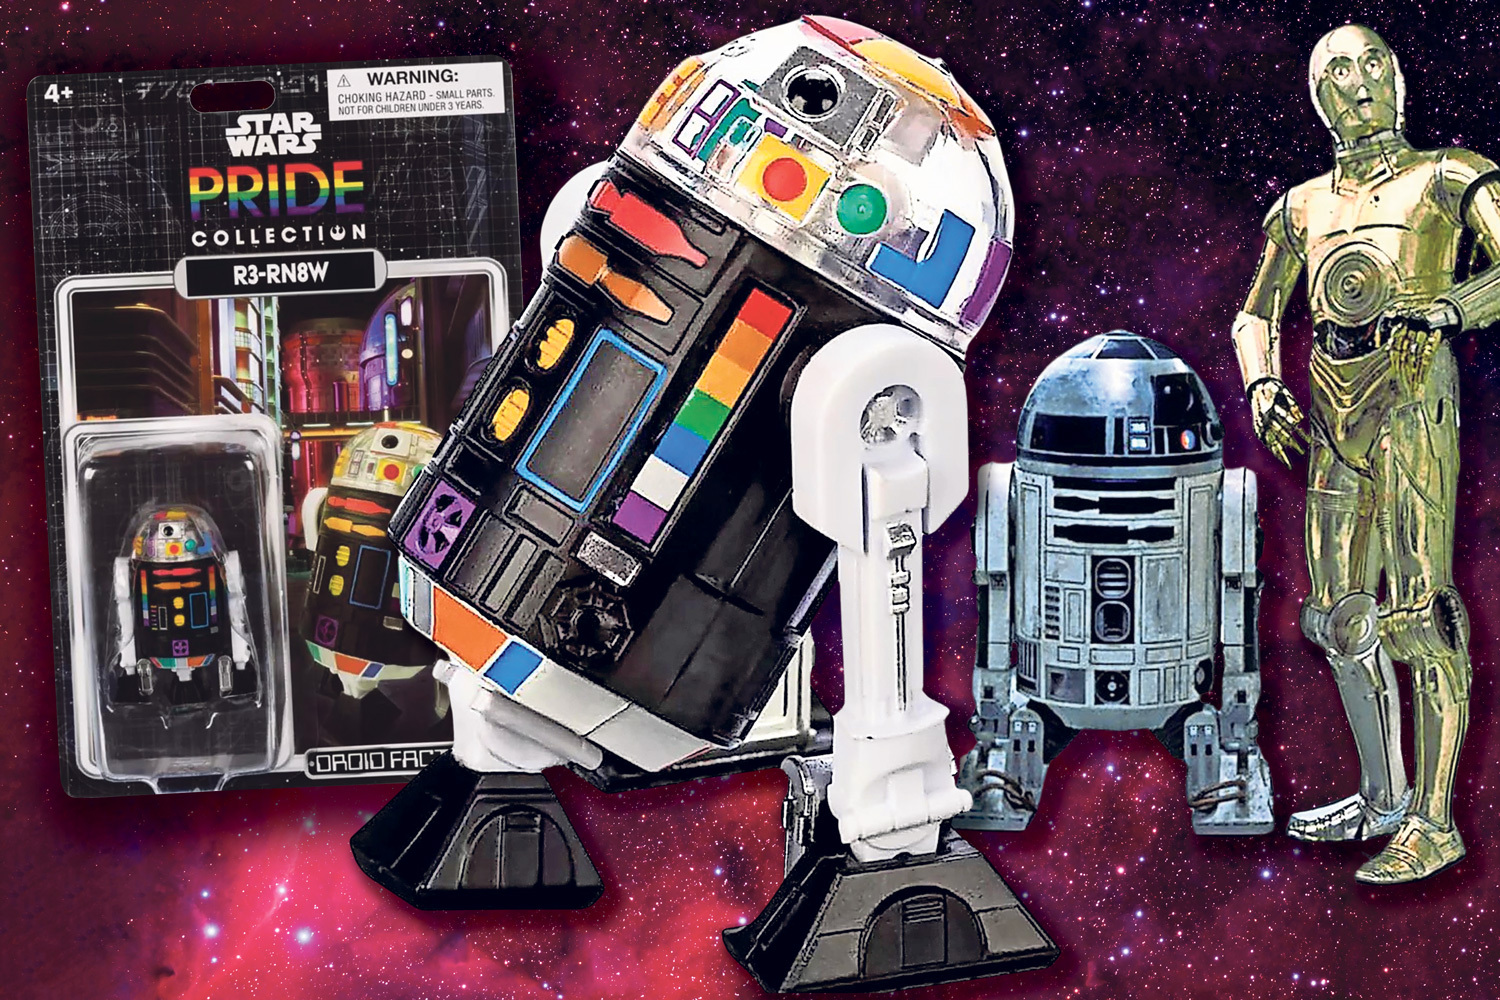 Furious Star Wars fans slam woke franchise for creating rainbow version of R2-D2